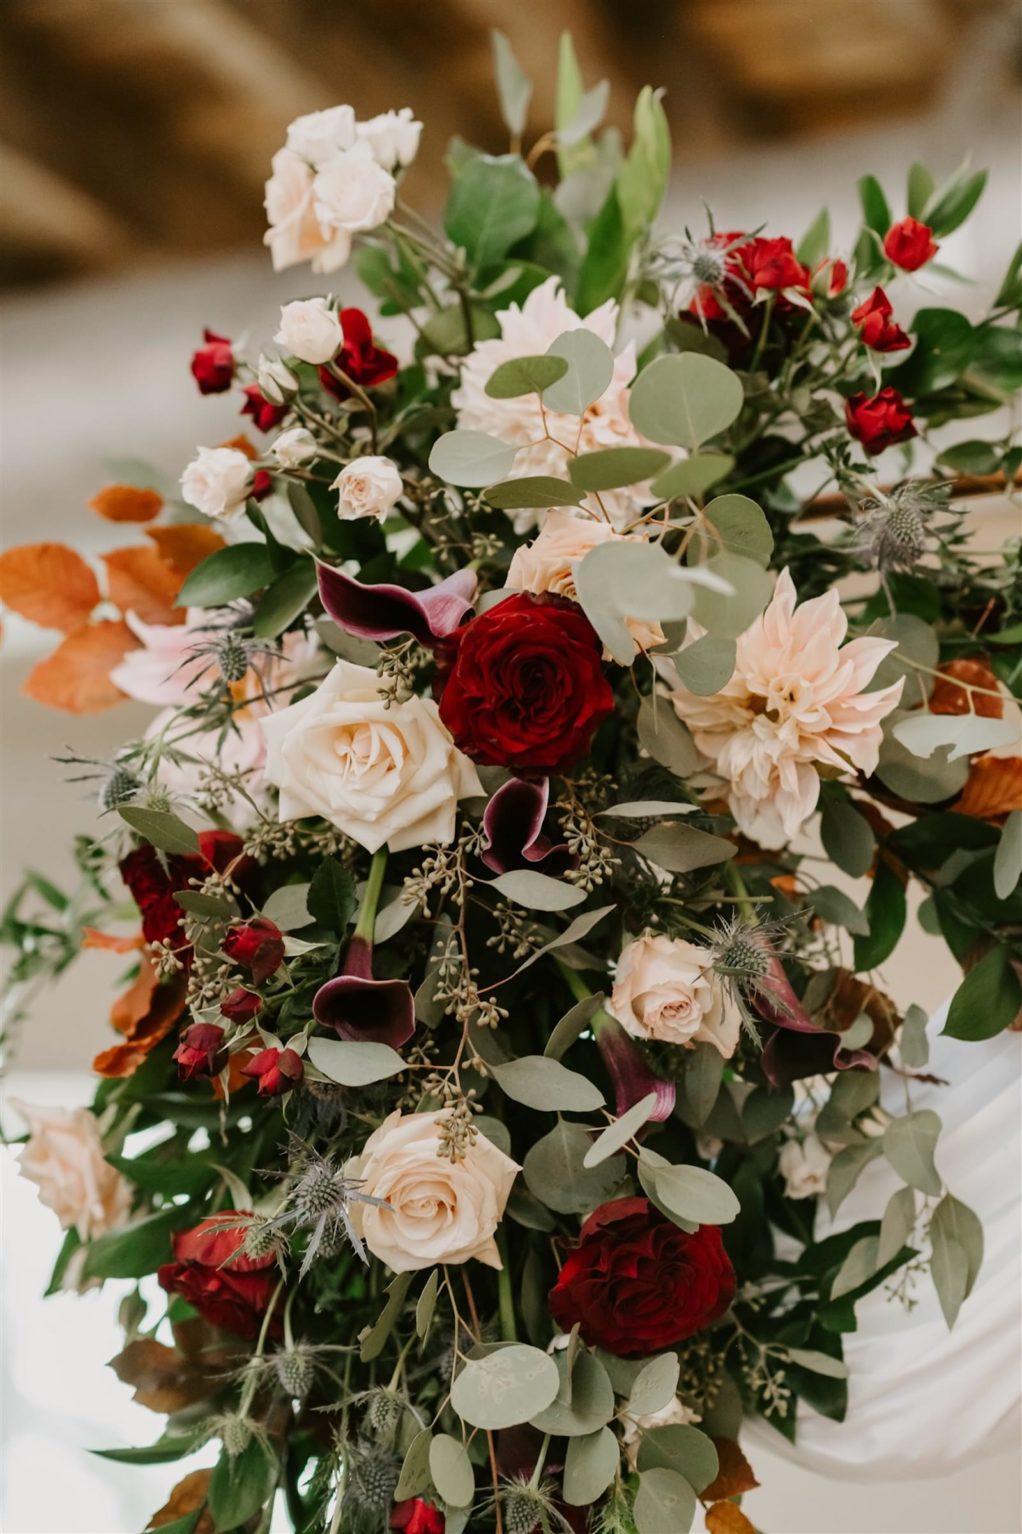 Draped Wedding Ceremony Arch with Fall Greenery Floral Arrangement Spray of Copper Leaves, White and Red Roses, Zinnia, and Eucalyptus | Botanica International Design